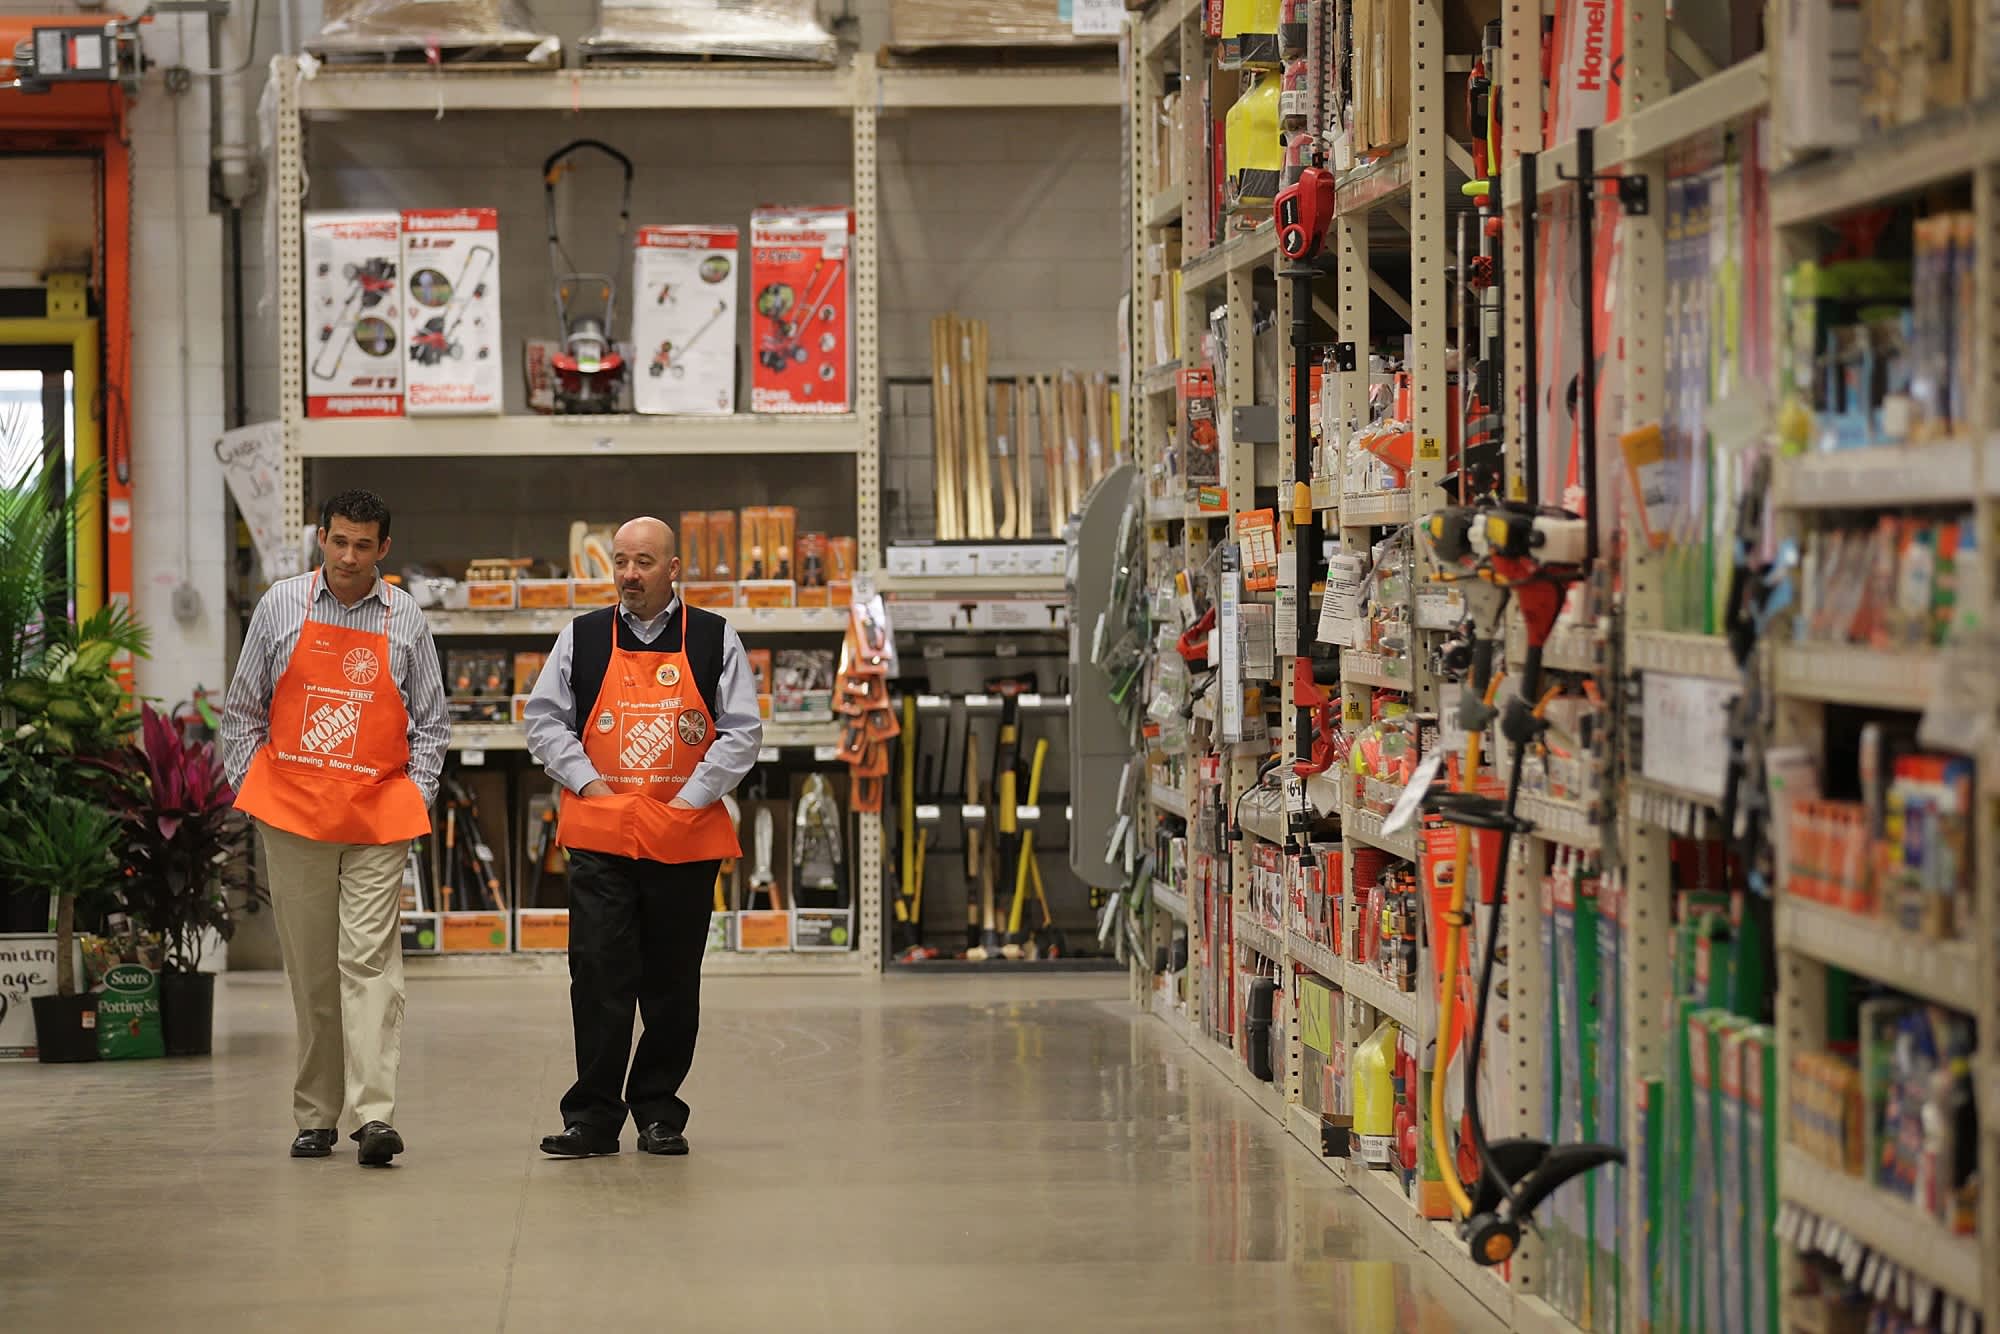 Home Depot is hiring 80,000 and offering up to $5,000 for college